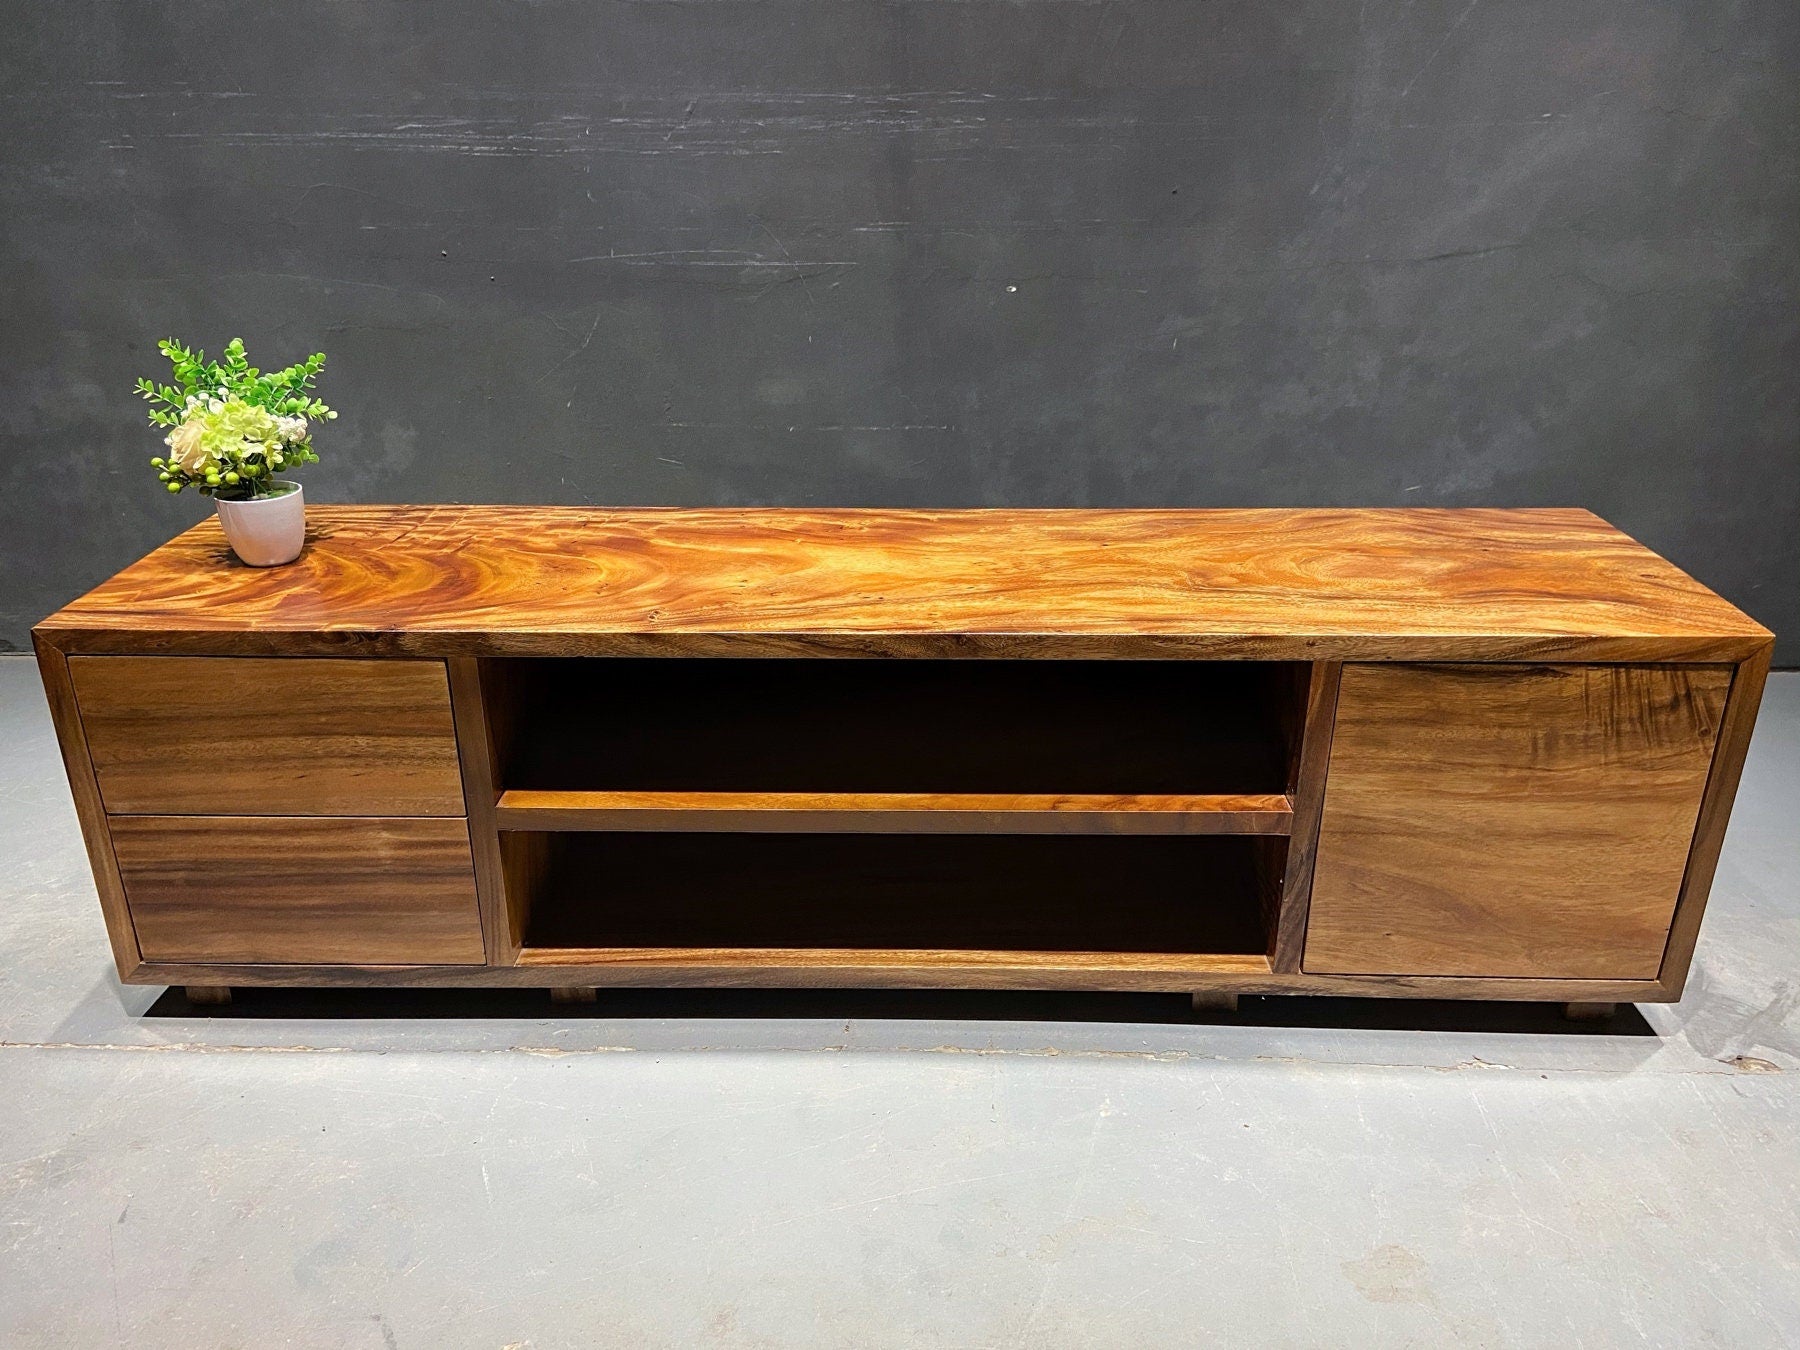 Natural wood furniture, Media cabinet made of walnut wood, Record Player Stand